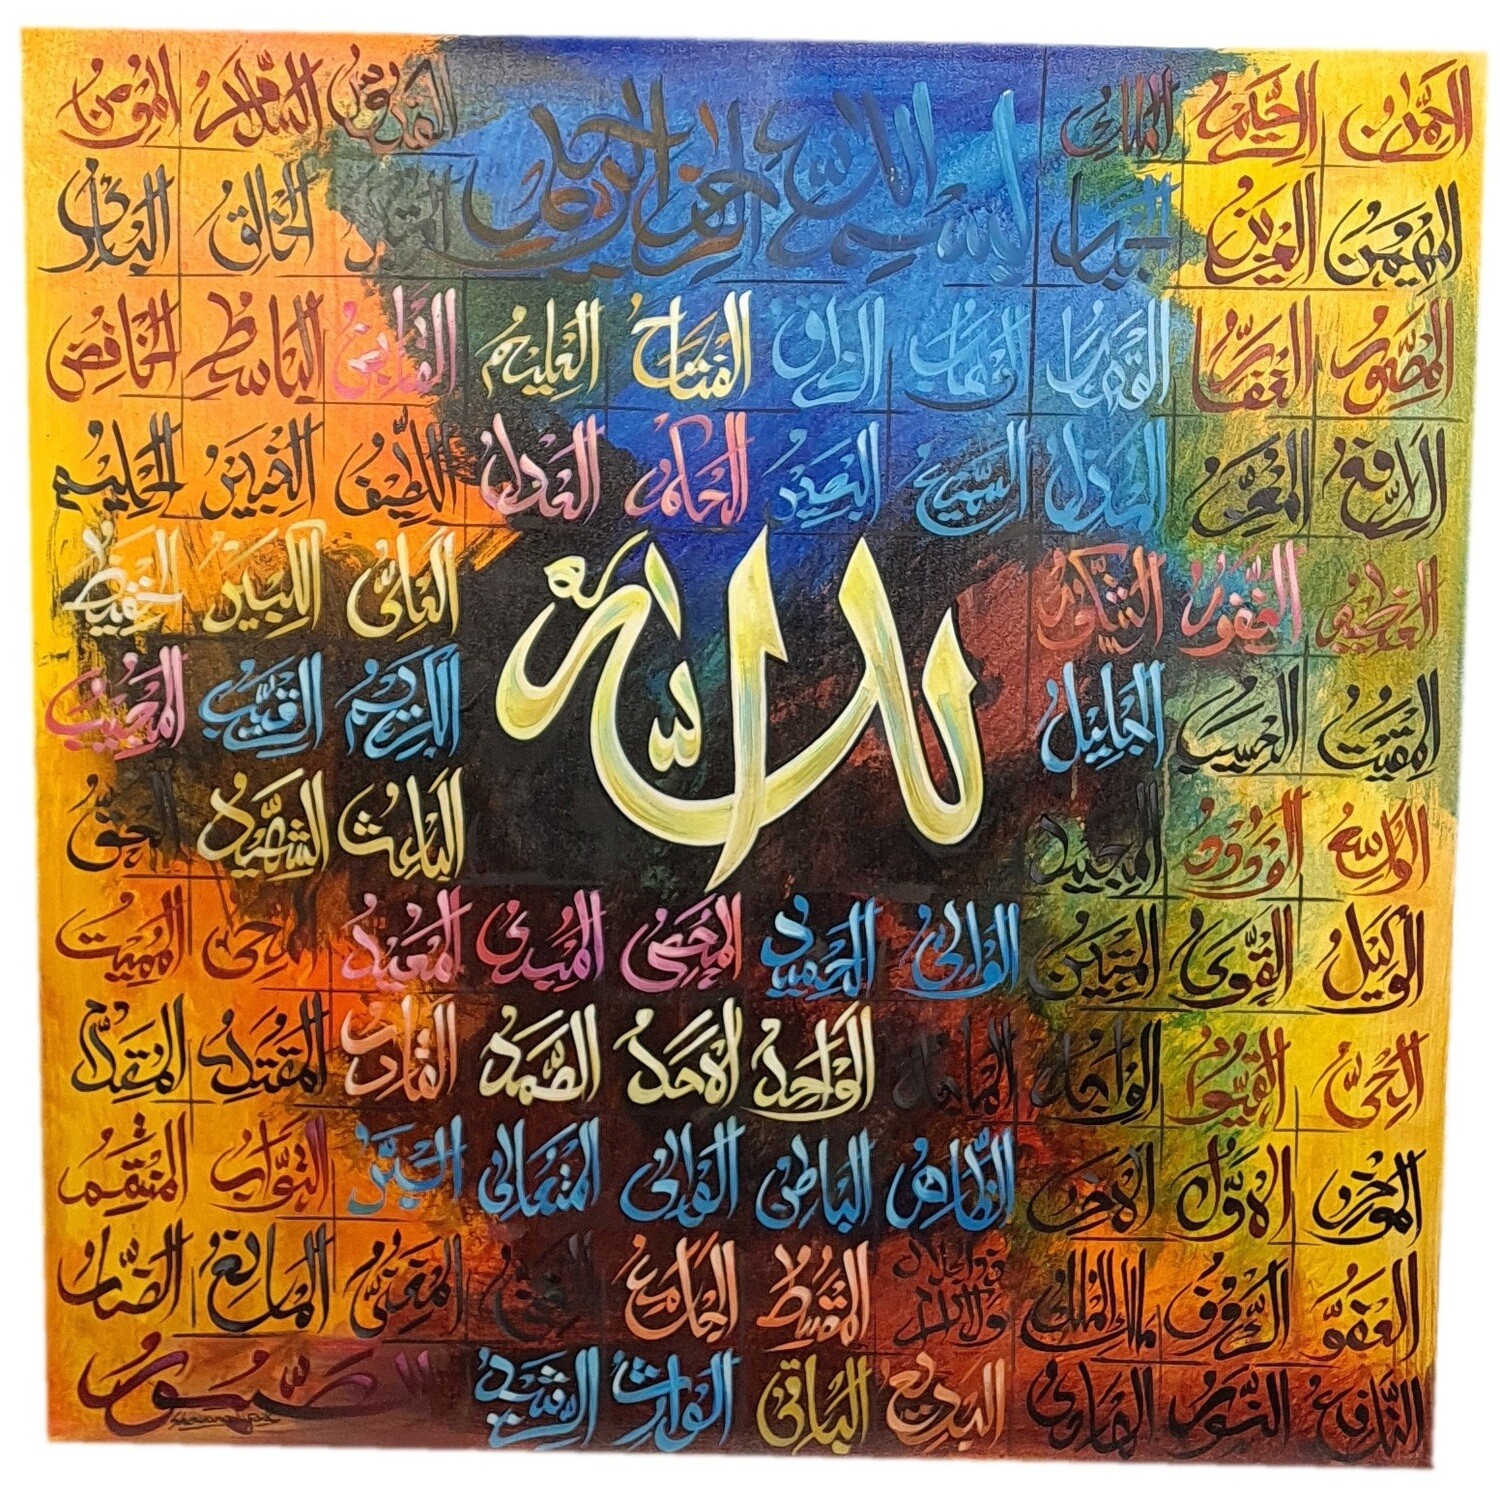 99 Names of Allah Abstract Blue & Yellow Tones Original Hand-painted Canvas